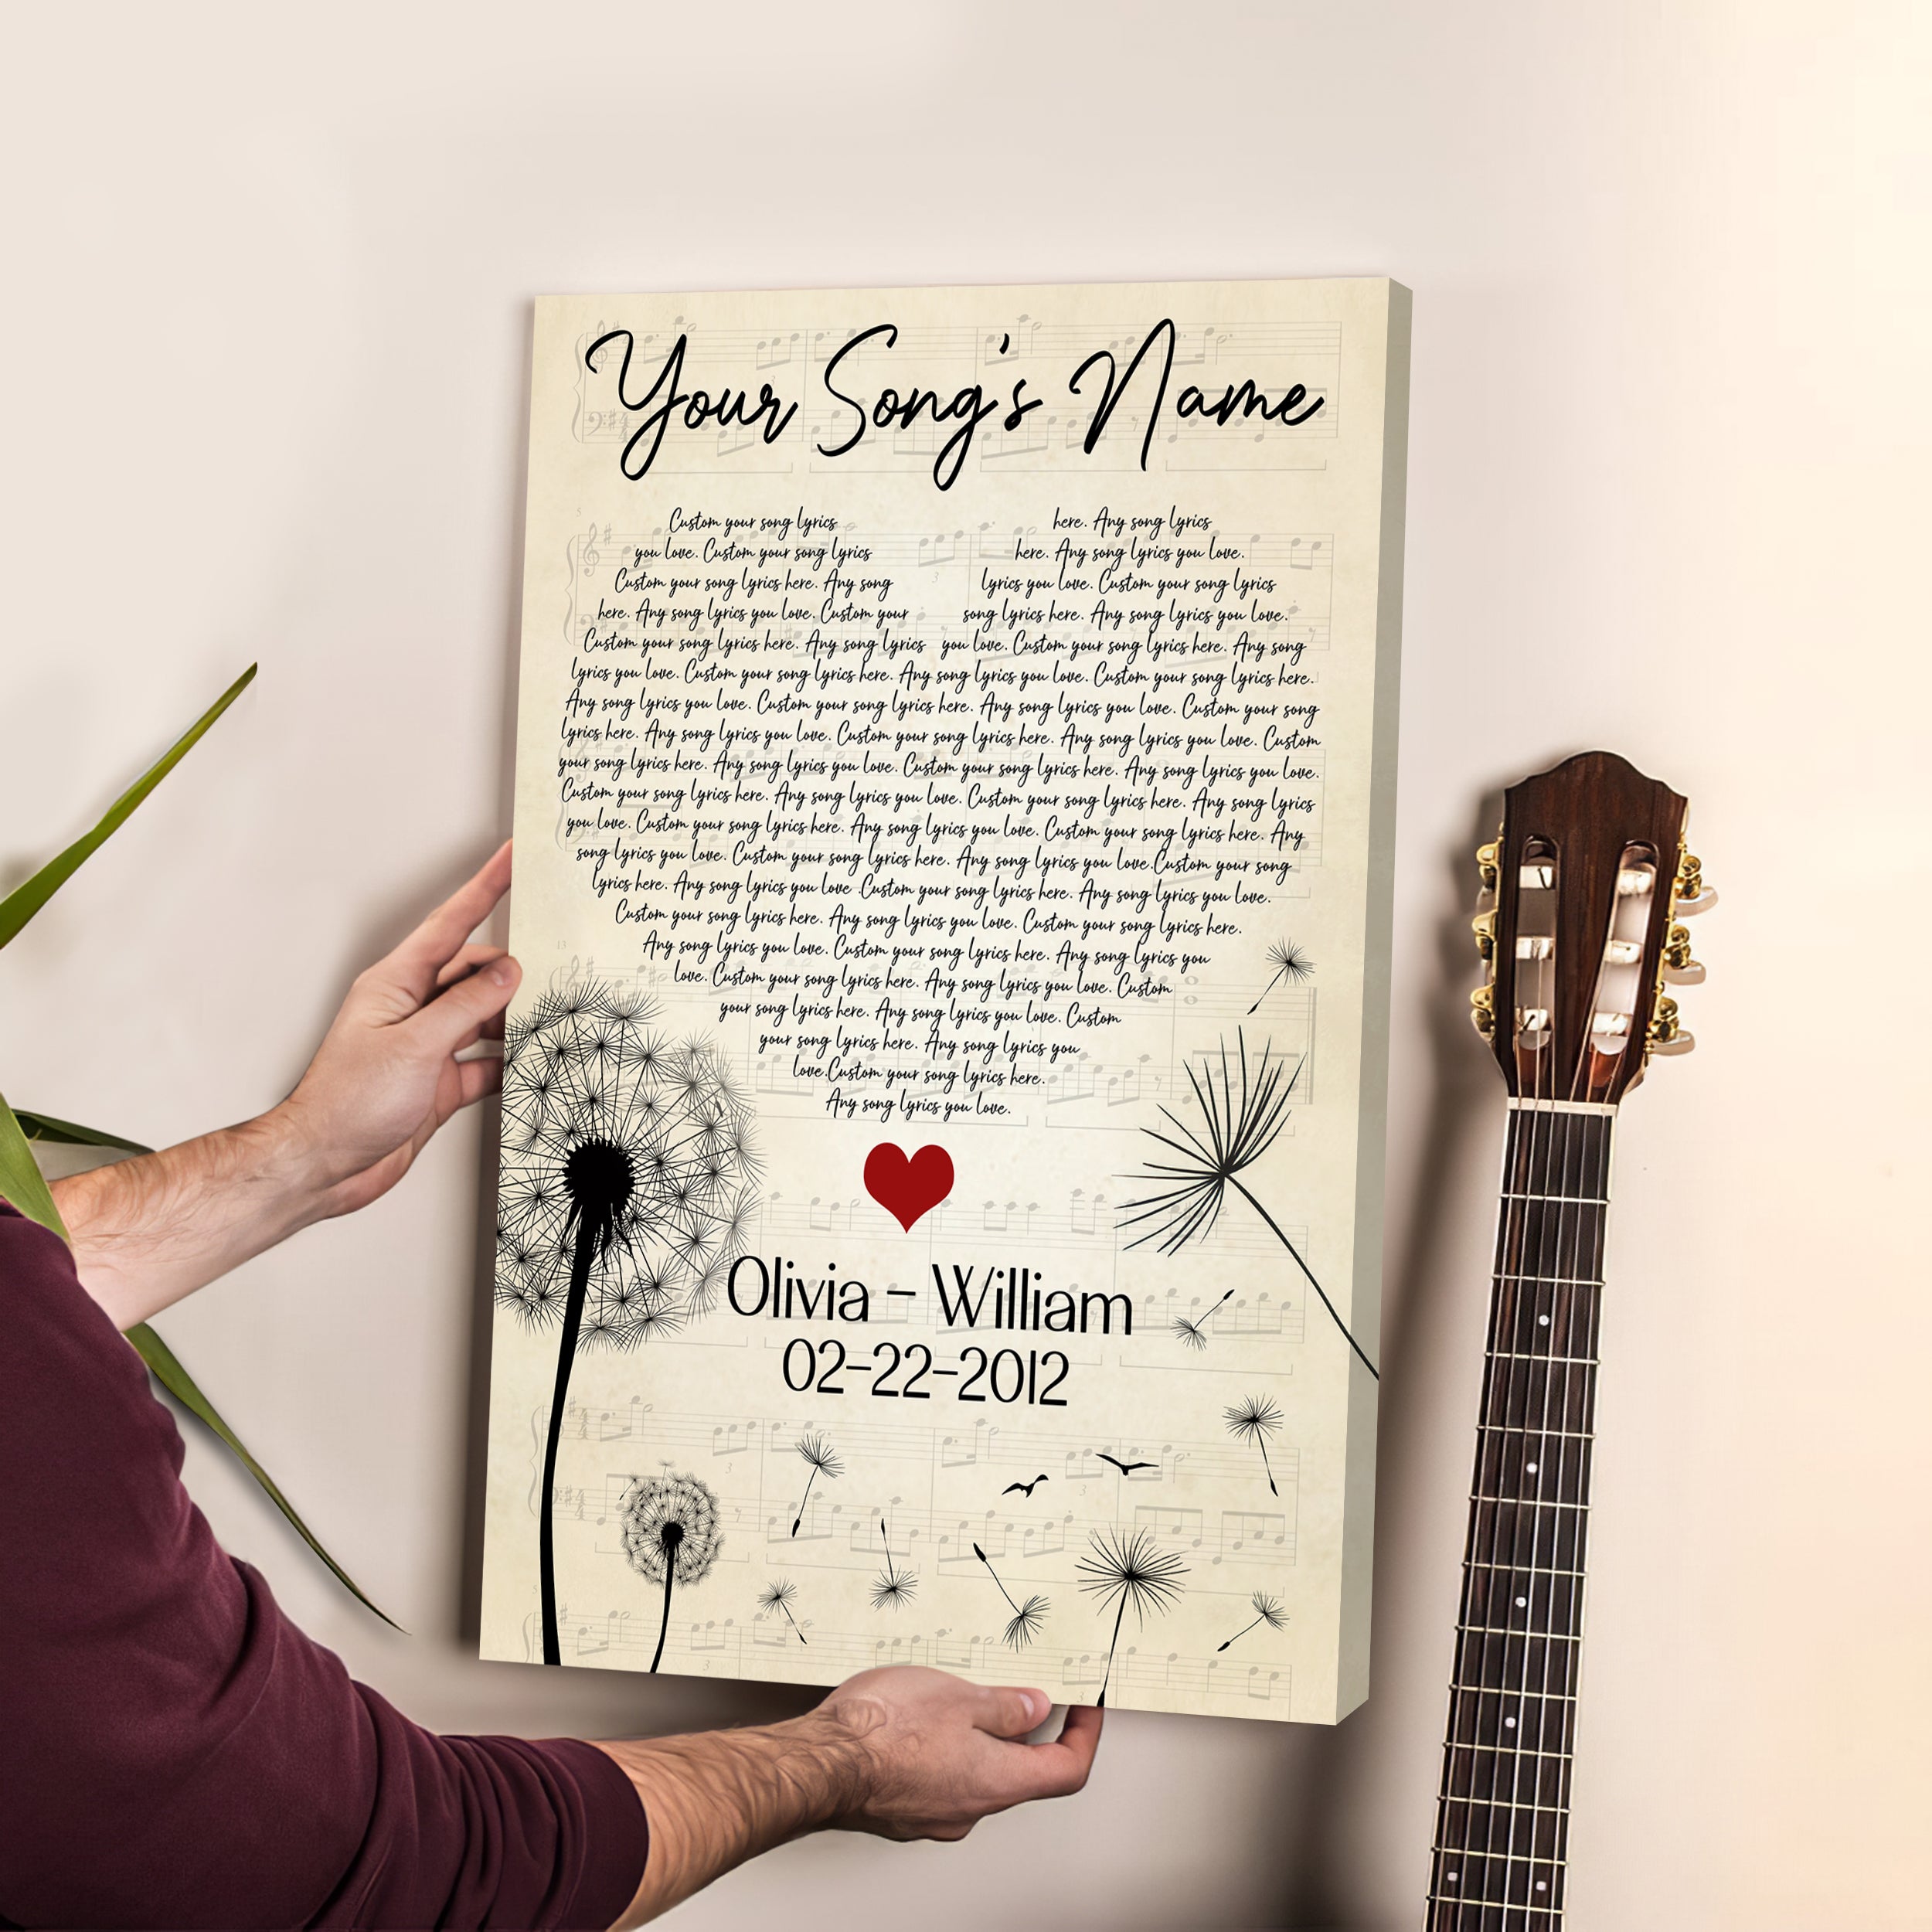 Custom Song Lyrics Canvas Wall Art - Gifts for Him and Her - Personalized Music Poster Wall Hanging Decor - Cool Things for Your Room, Christmas Gifts for Boyfriend, Couples Gifts